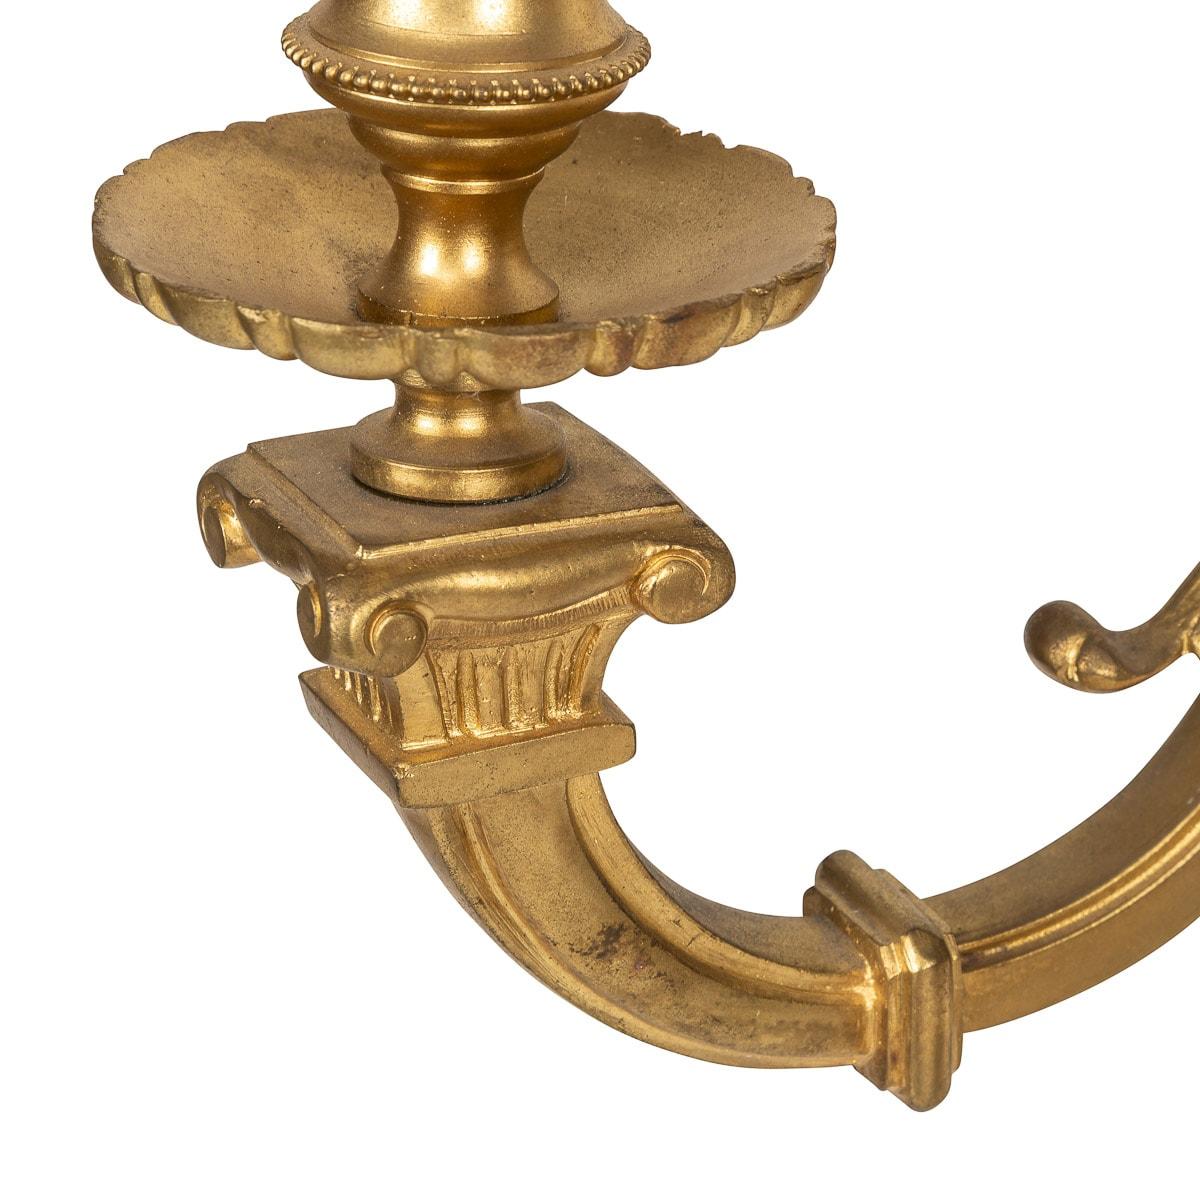 19th Century French Régence Style Ormolu D'appliques Wall Lights, C.1830 For Sale 5